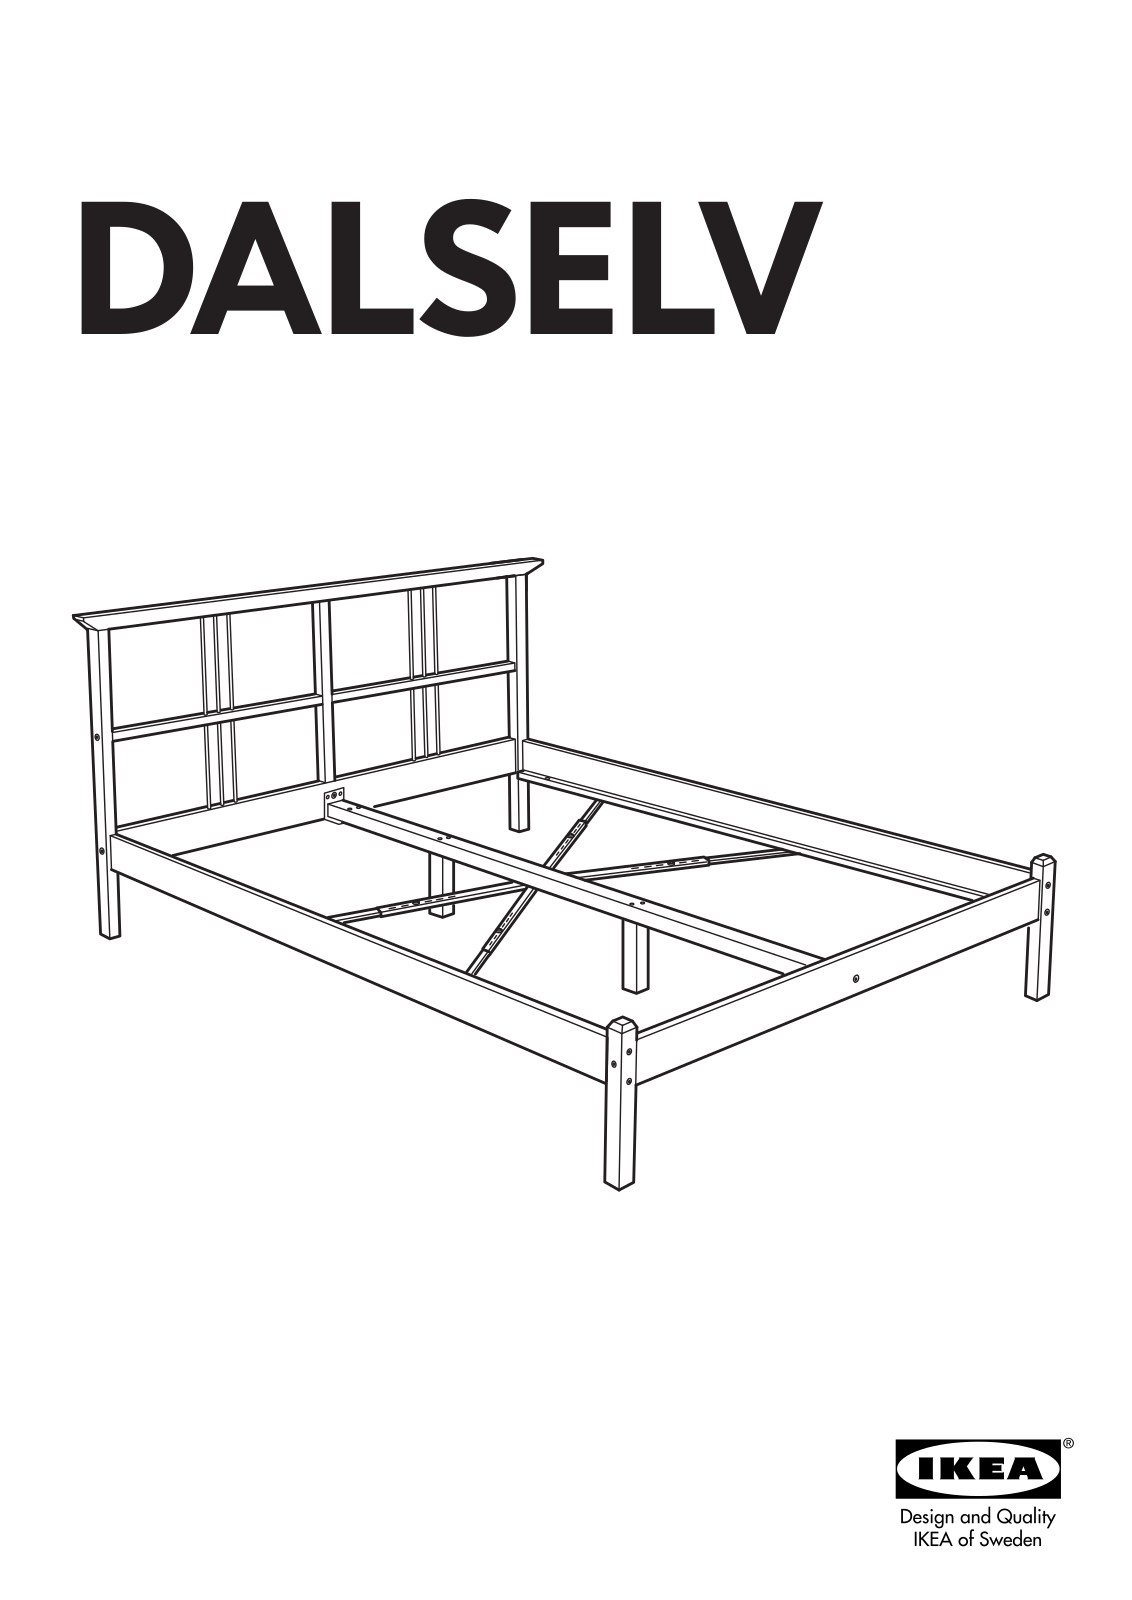 IKEA DALSELV BED FRAME FULL-DOUBLE, DALSELV BED FRAME QUEEN Assembly Instruction